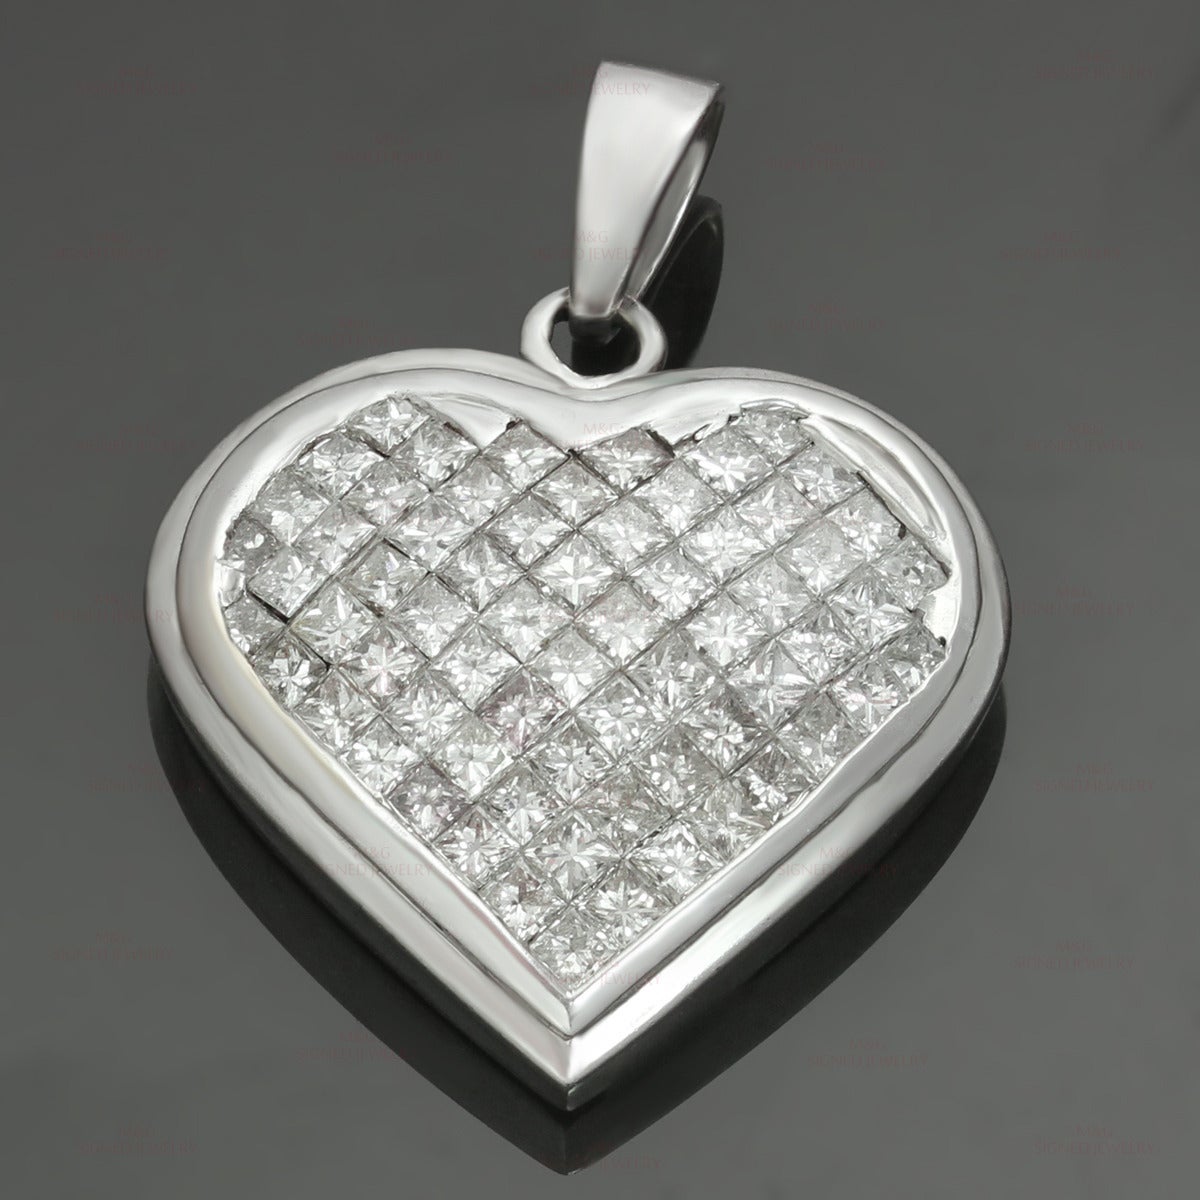 This fabulous heart-shaped pendant is made in 18k white gold and features a stunning invisible setting of princess-cut G-H VS1-VS2 diamonds of an estimated 3.25 carats. Chic and romantic. Measurements: 0.82" (21mm) width, 1.10" (28mm)